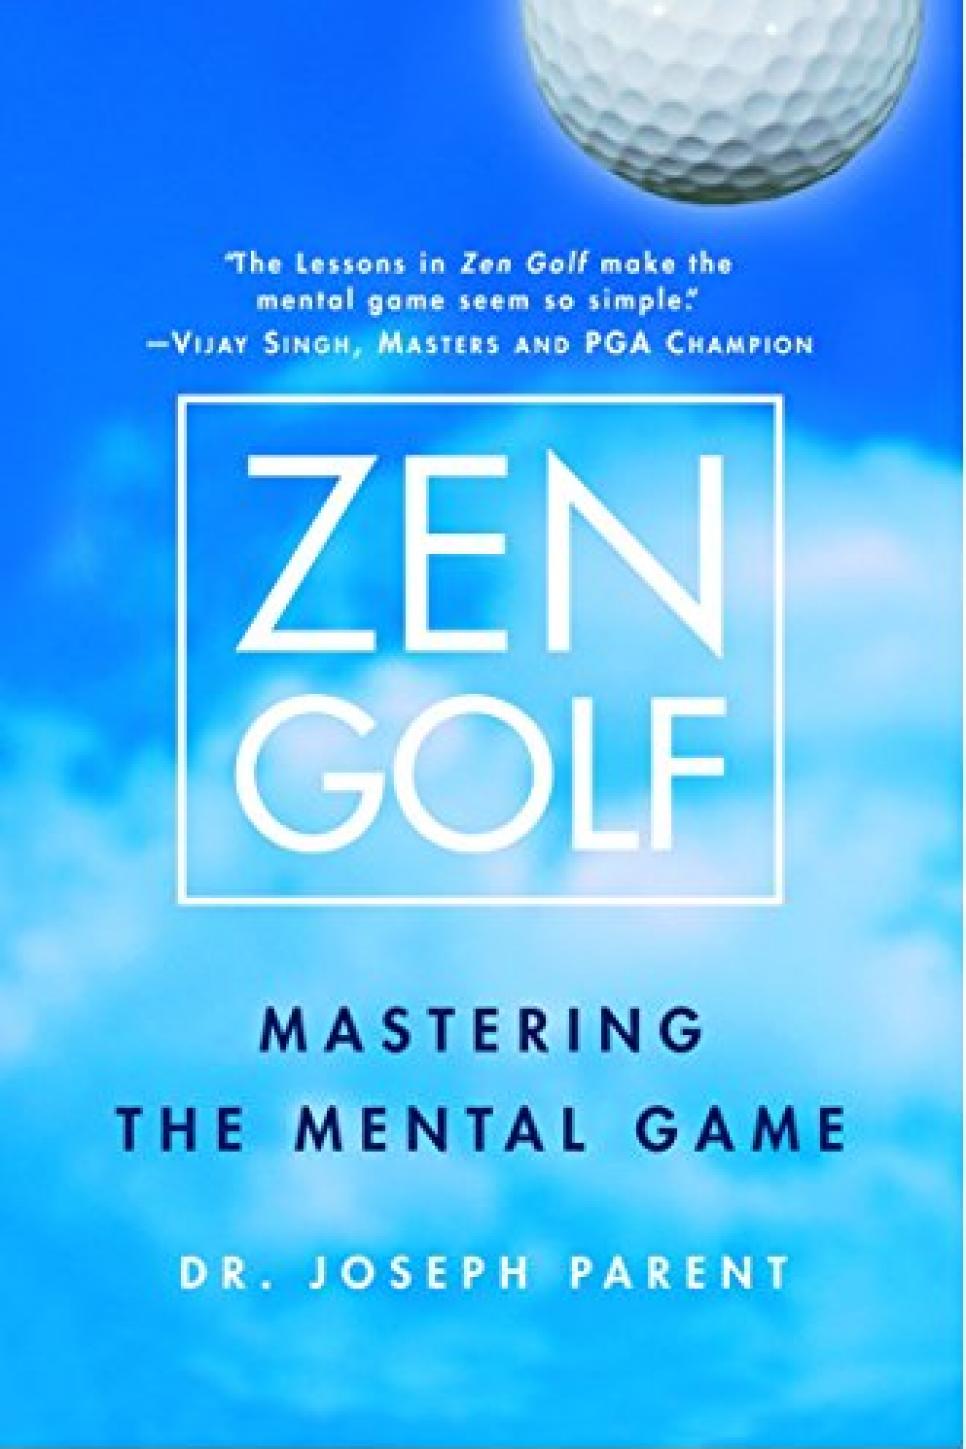 rx-amazonzen-golf-mastering-the-mental-game-hardcover--by-dr-joseph-parent-.jpeg